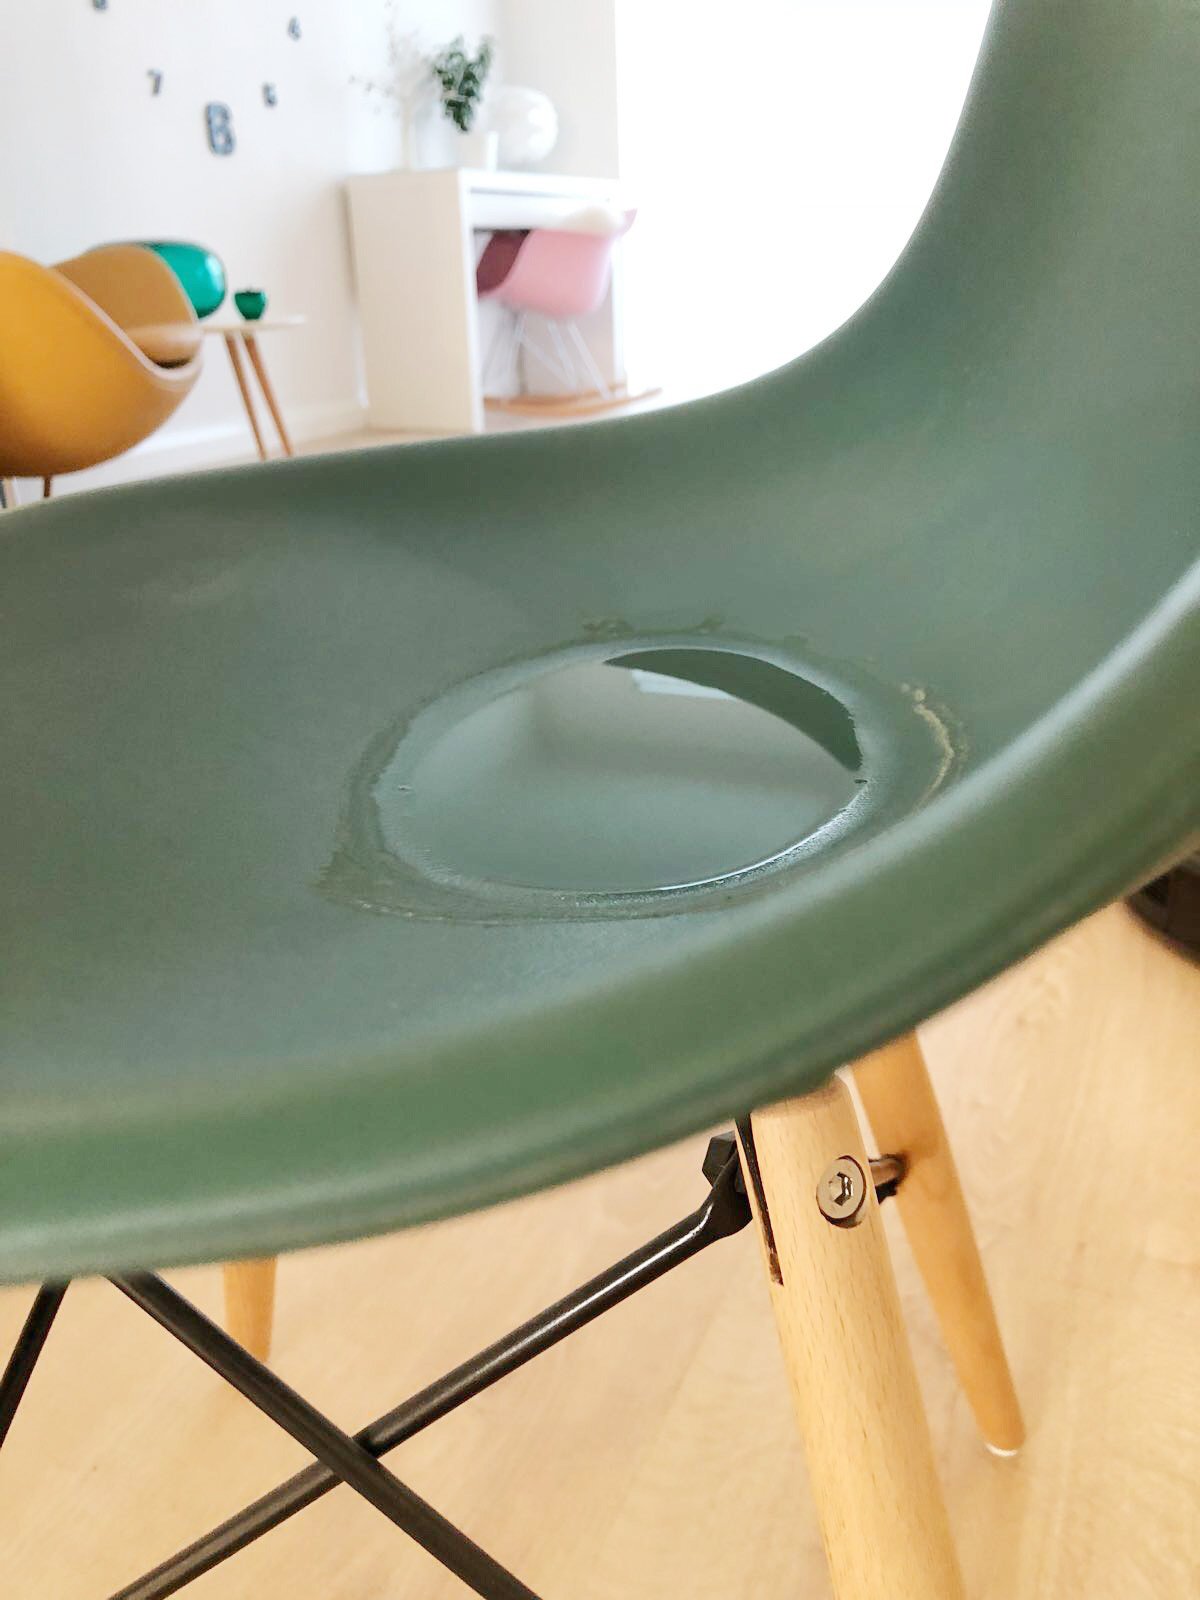 water on chair